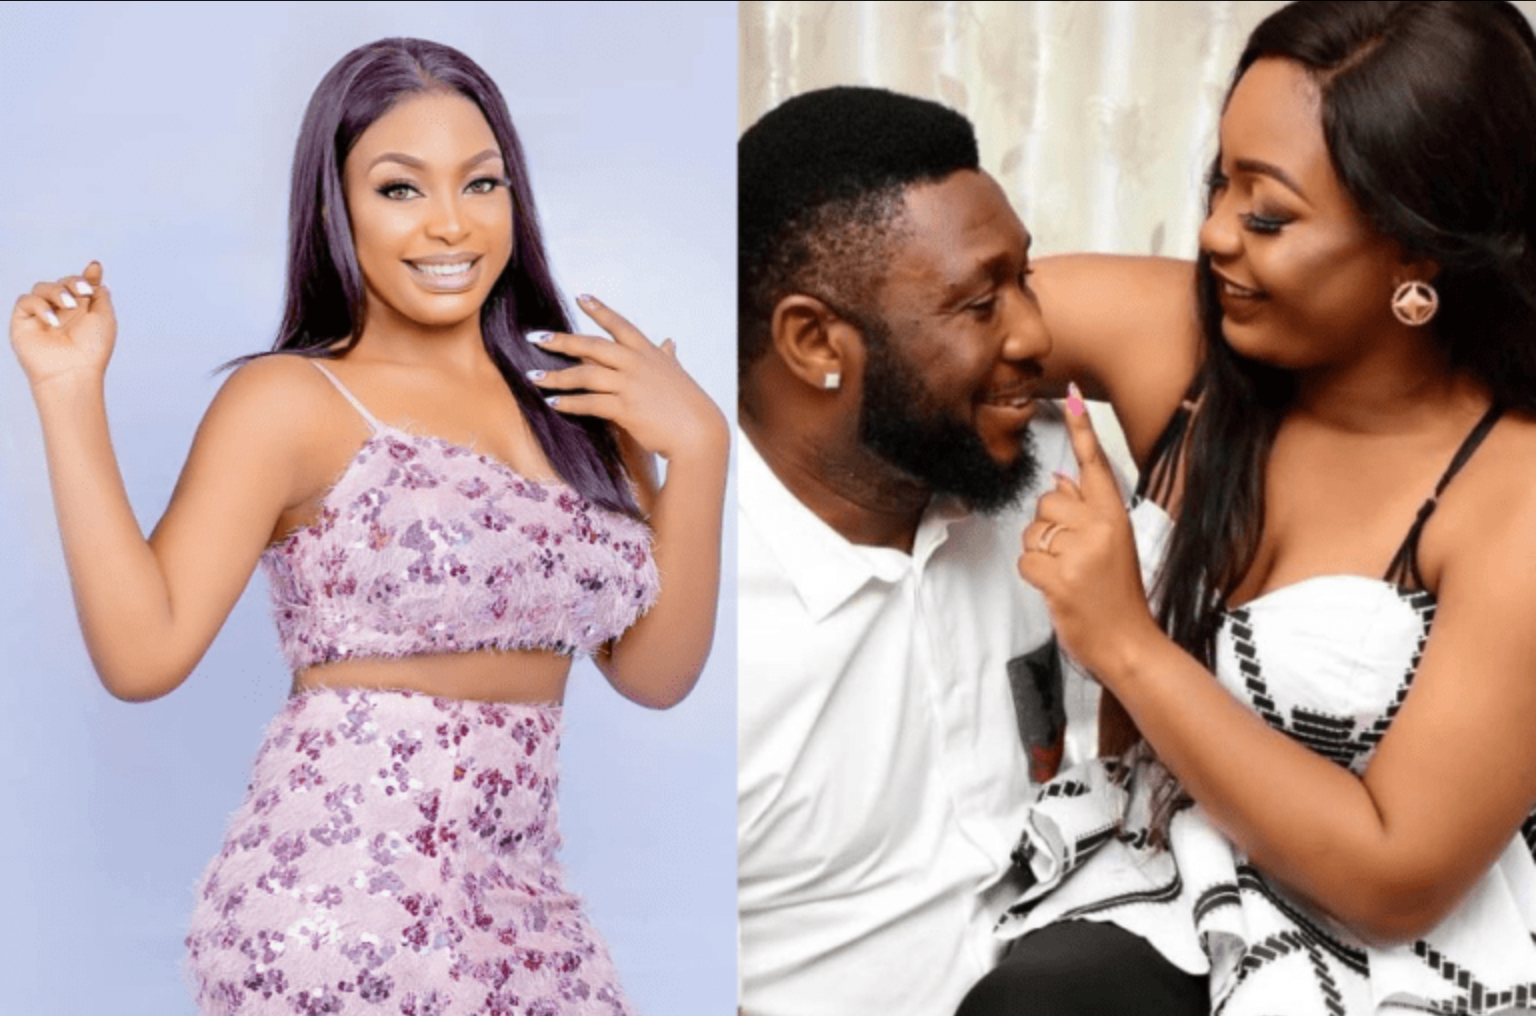 Tchidi Chikere Shares Video With Wife Nuella To Debunk Divorce Rumors